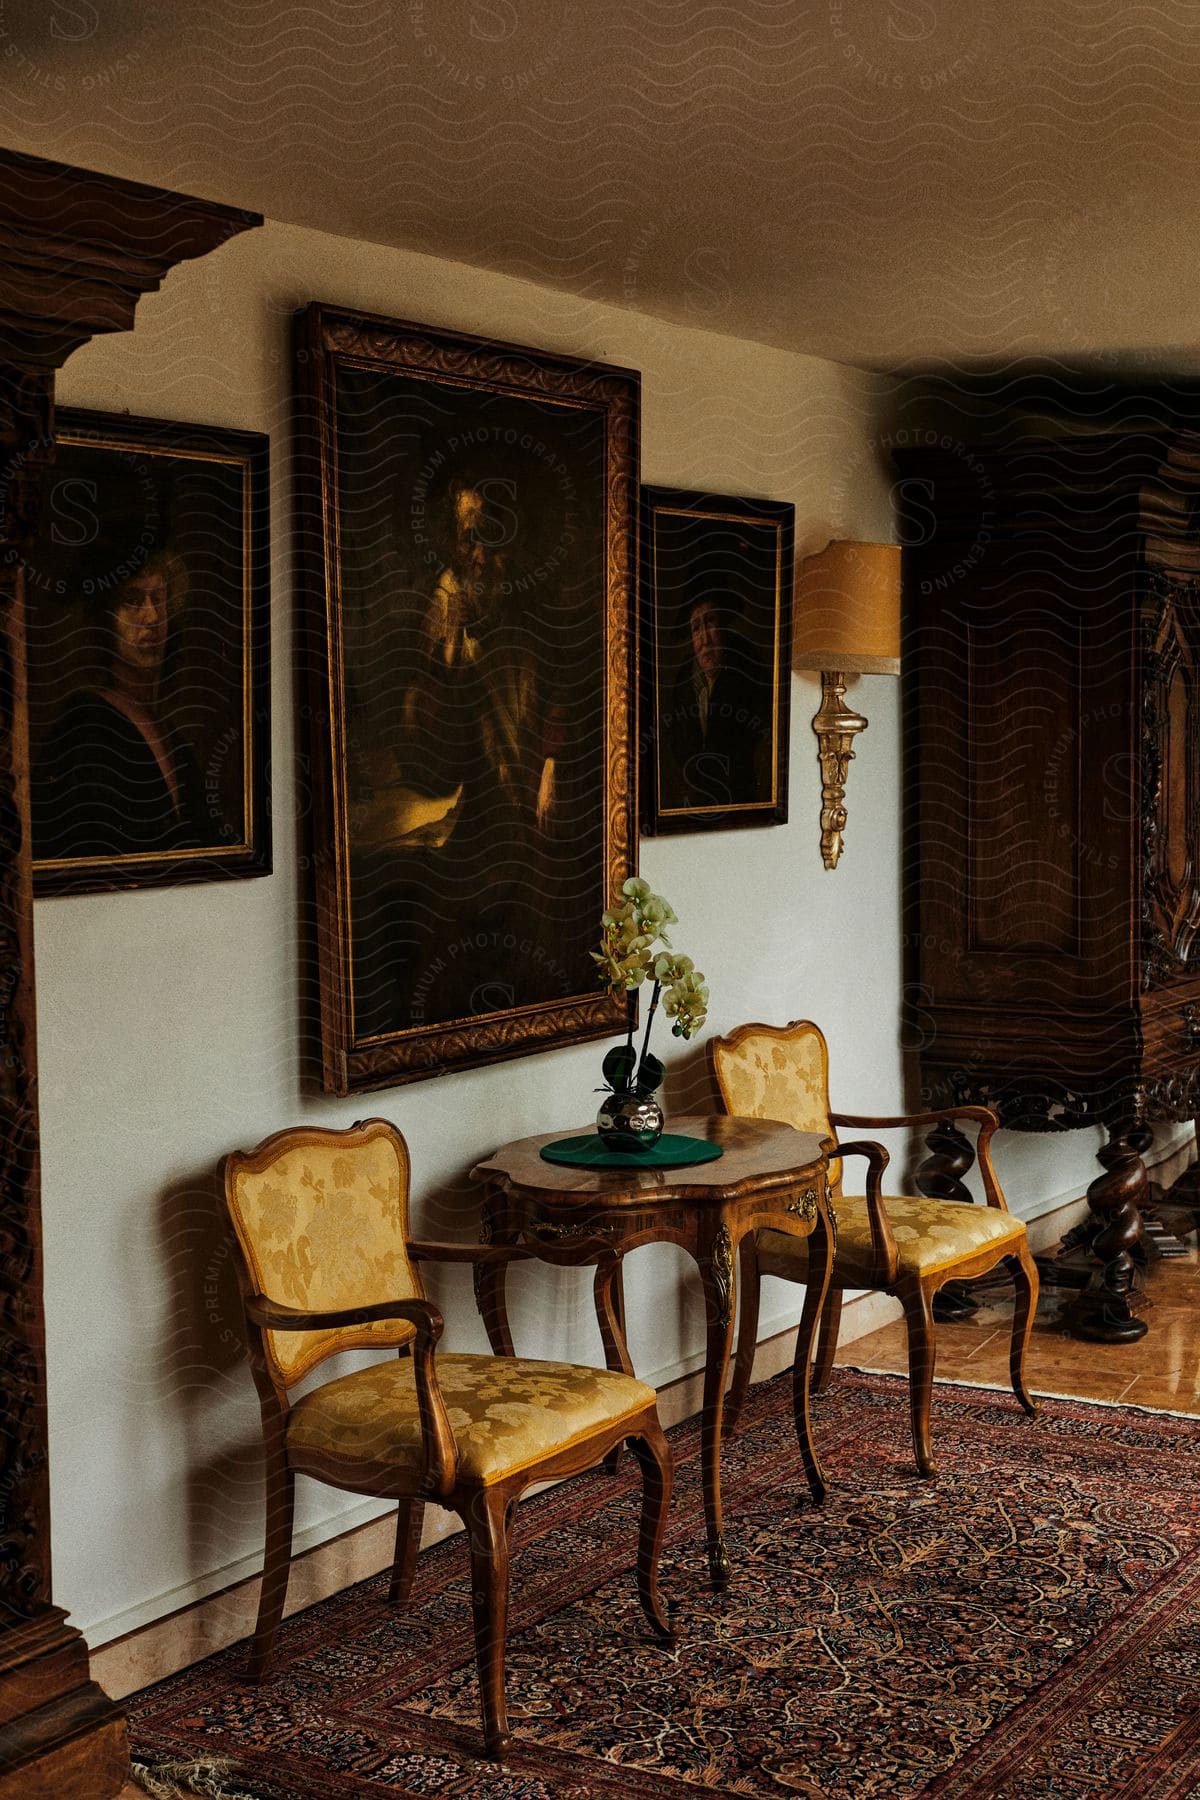 Two older chairs are situated against a wall with three portraits.